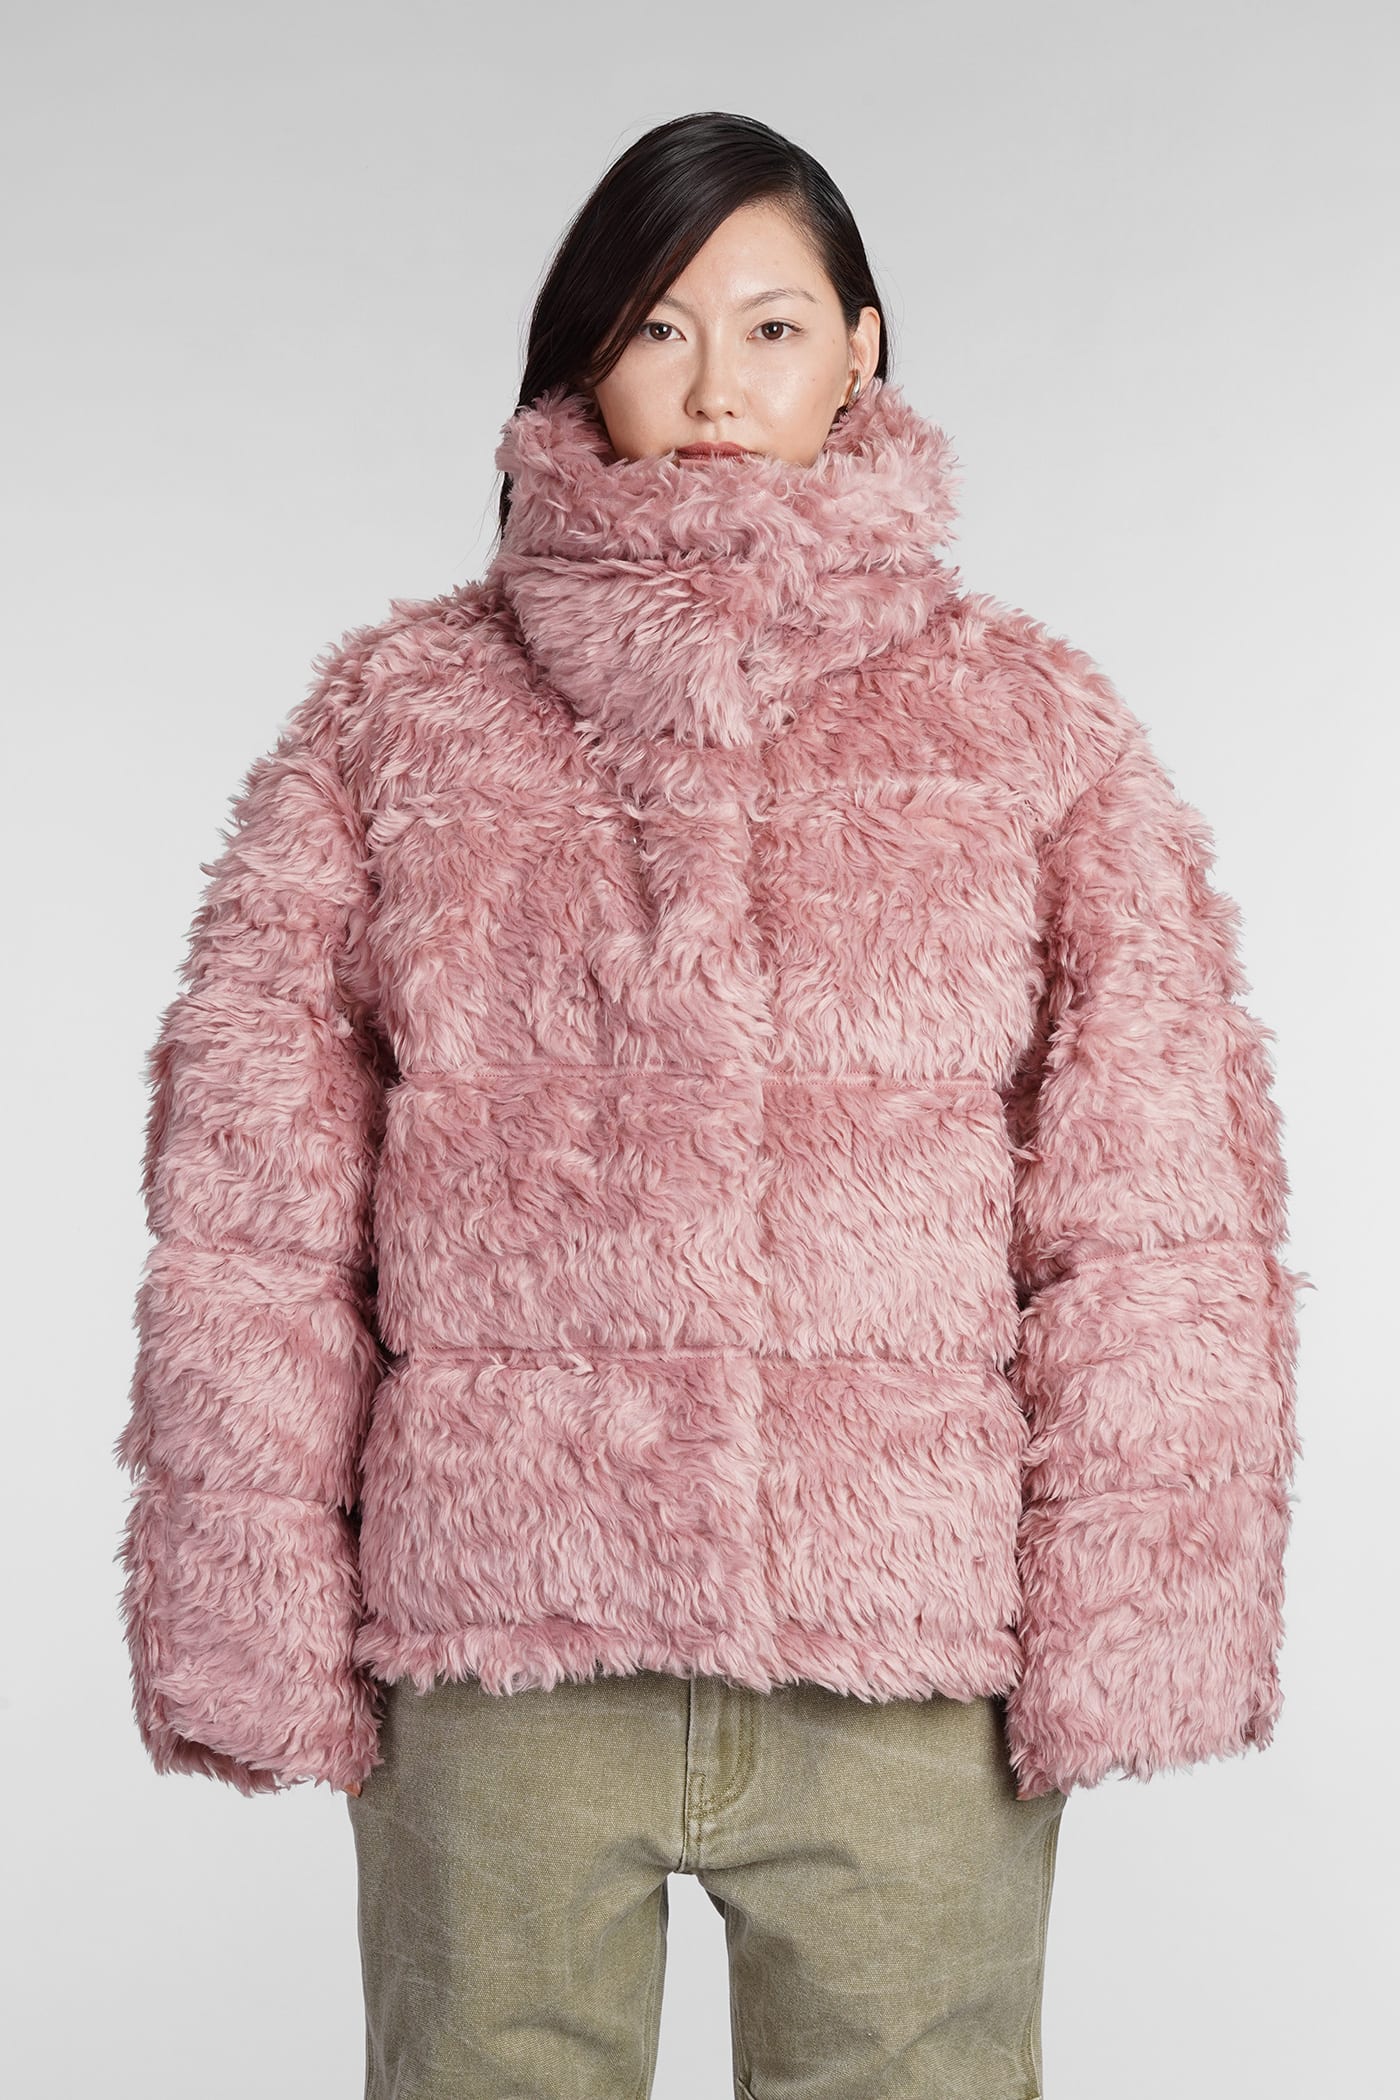 ACNE STUDIOS PUFFER IN ROSE-PINK ACRYLIC